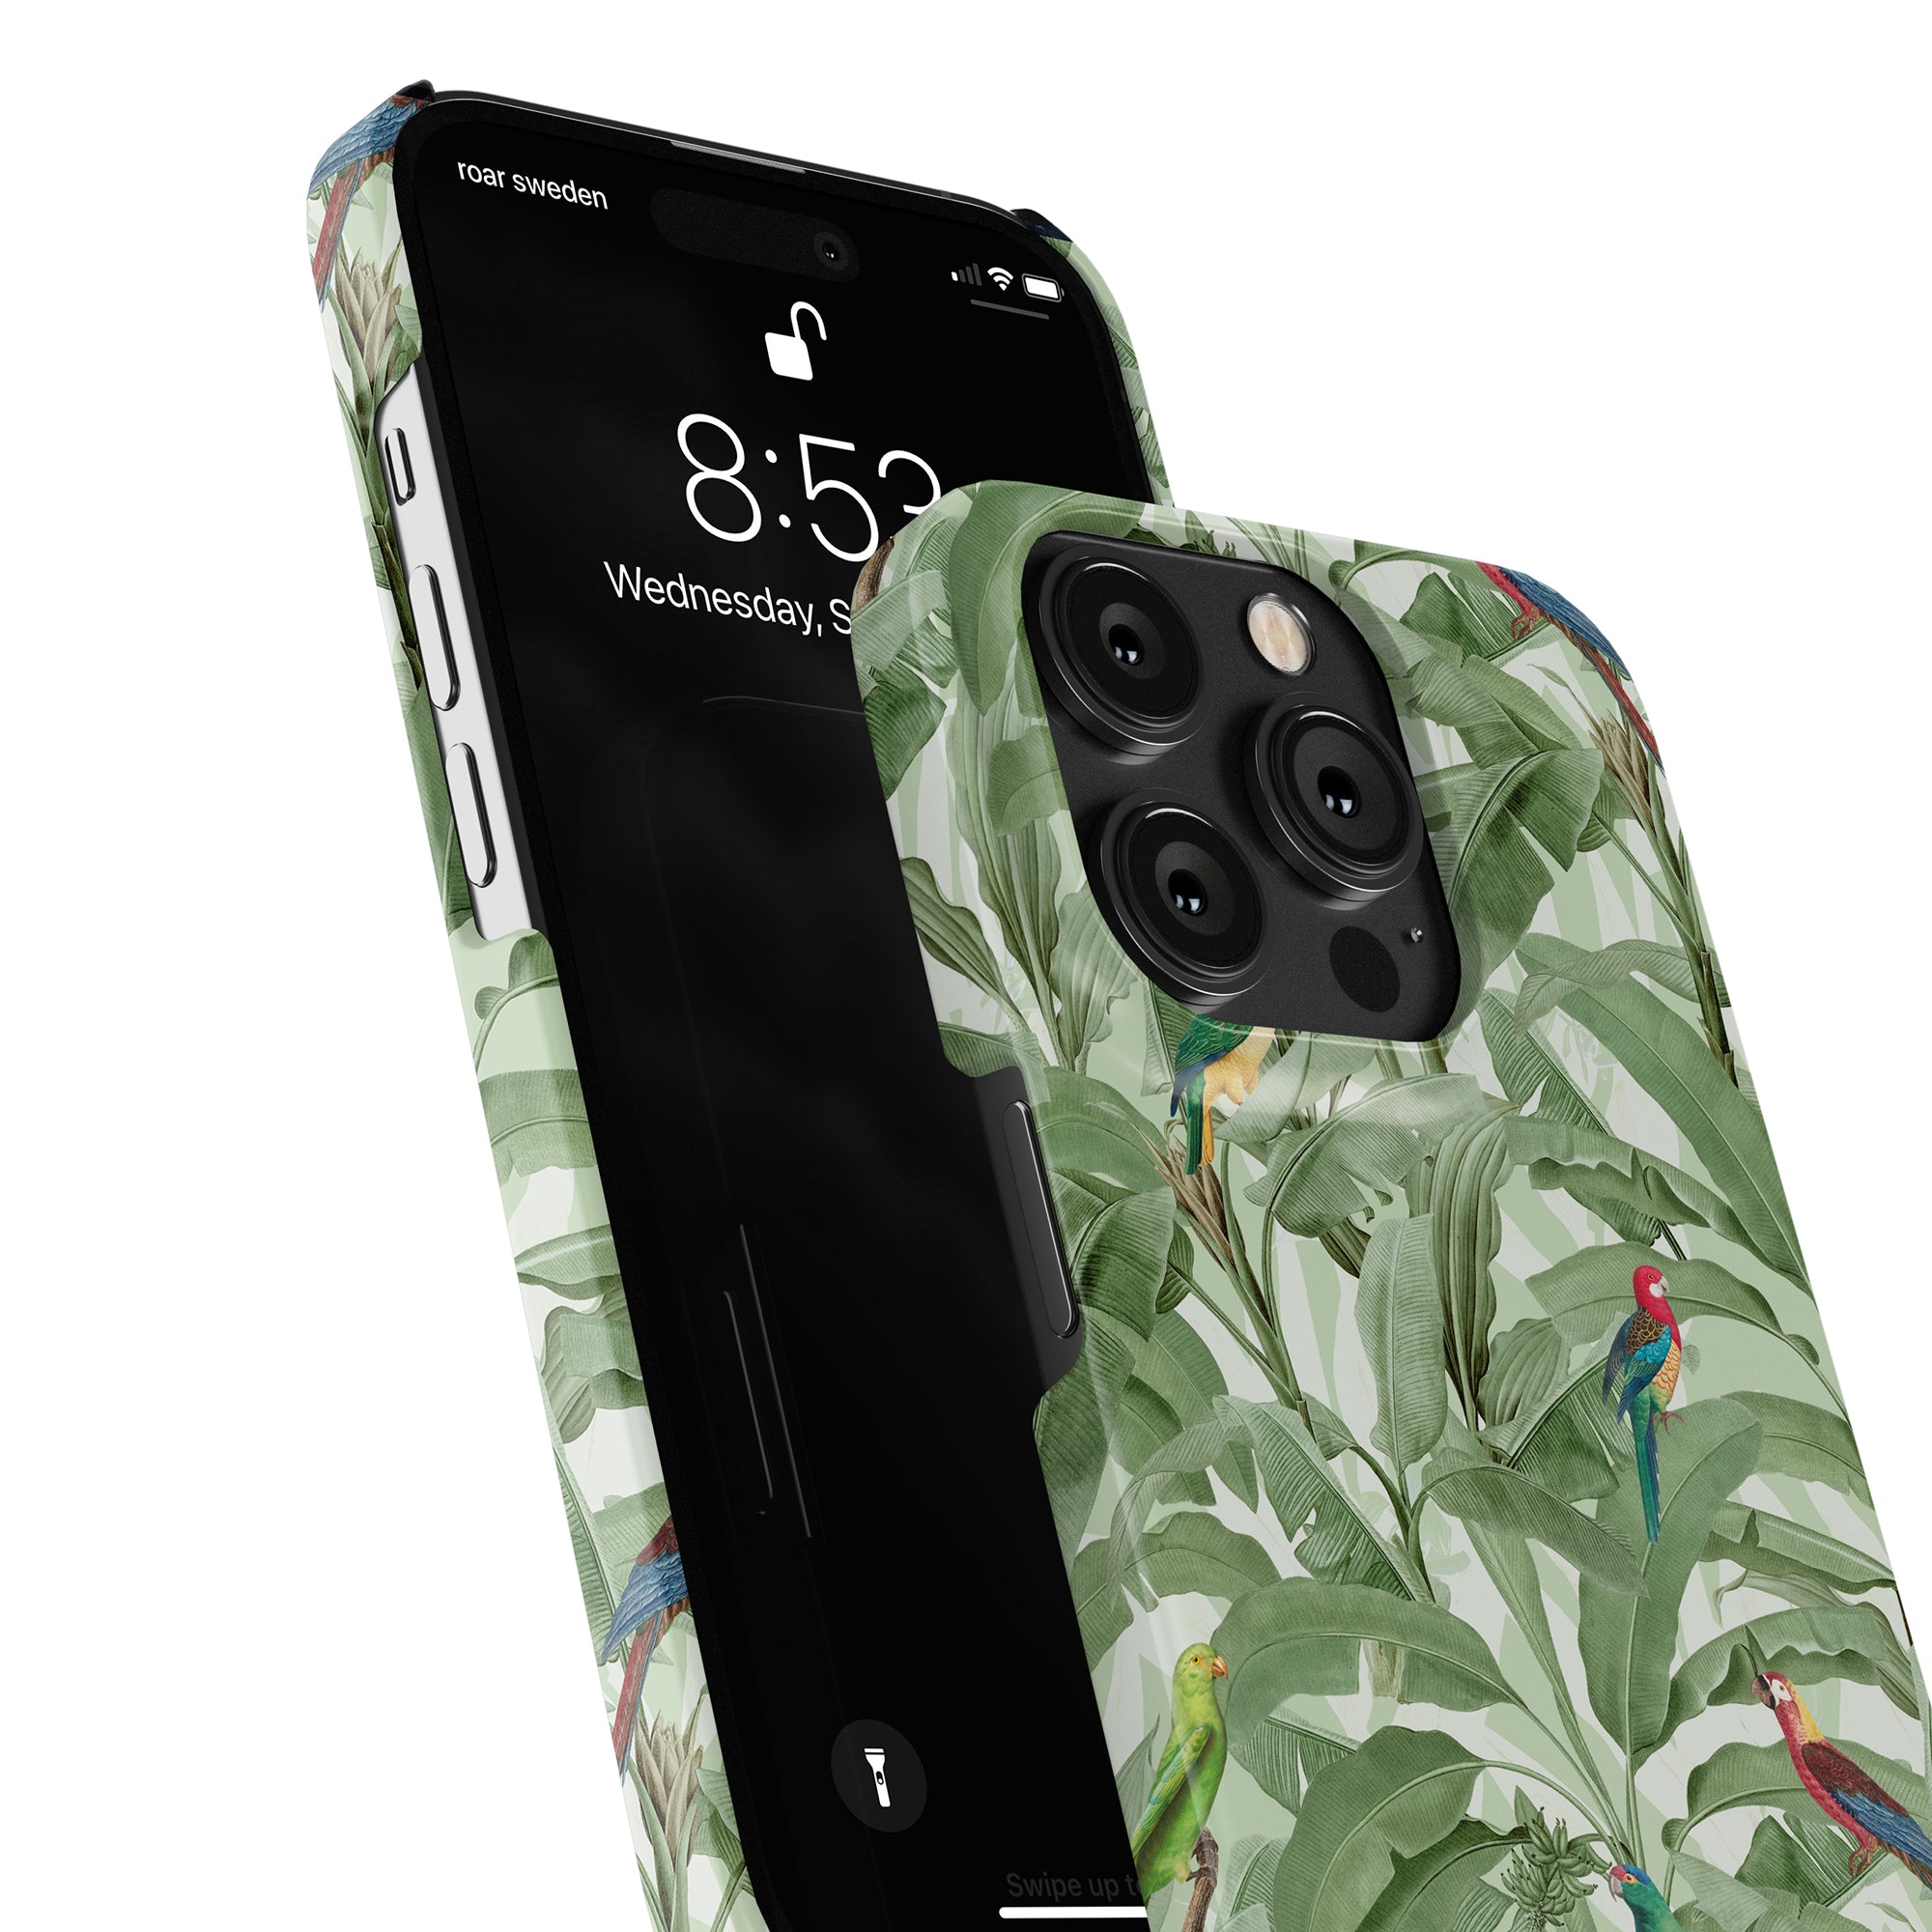 Parrot Paradise - Slim case with a tropical bird-themed design, showcasing its vibrant display and rear camera, viewed at an angle perfect for SEO-optimized product descriptions.